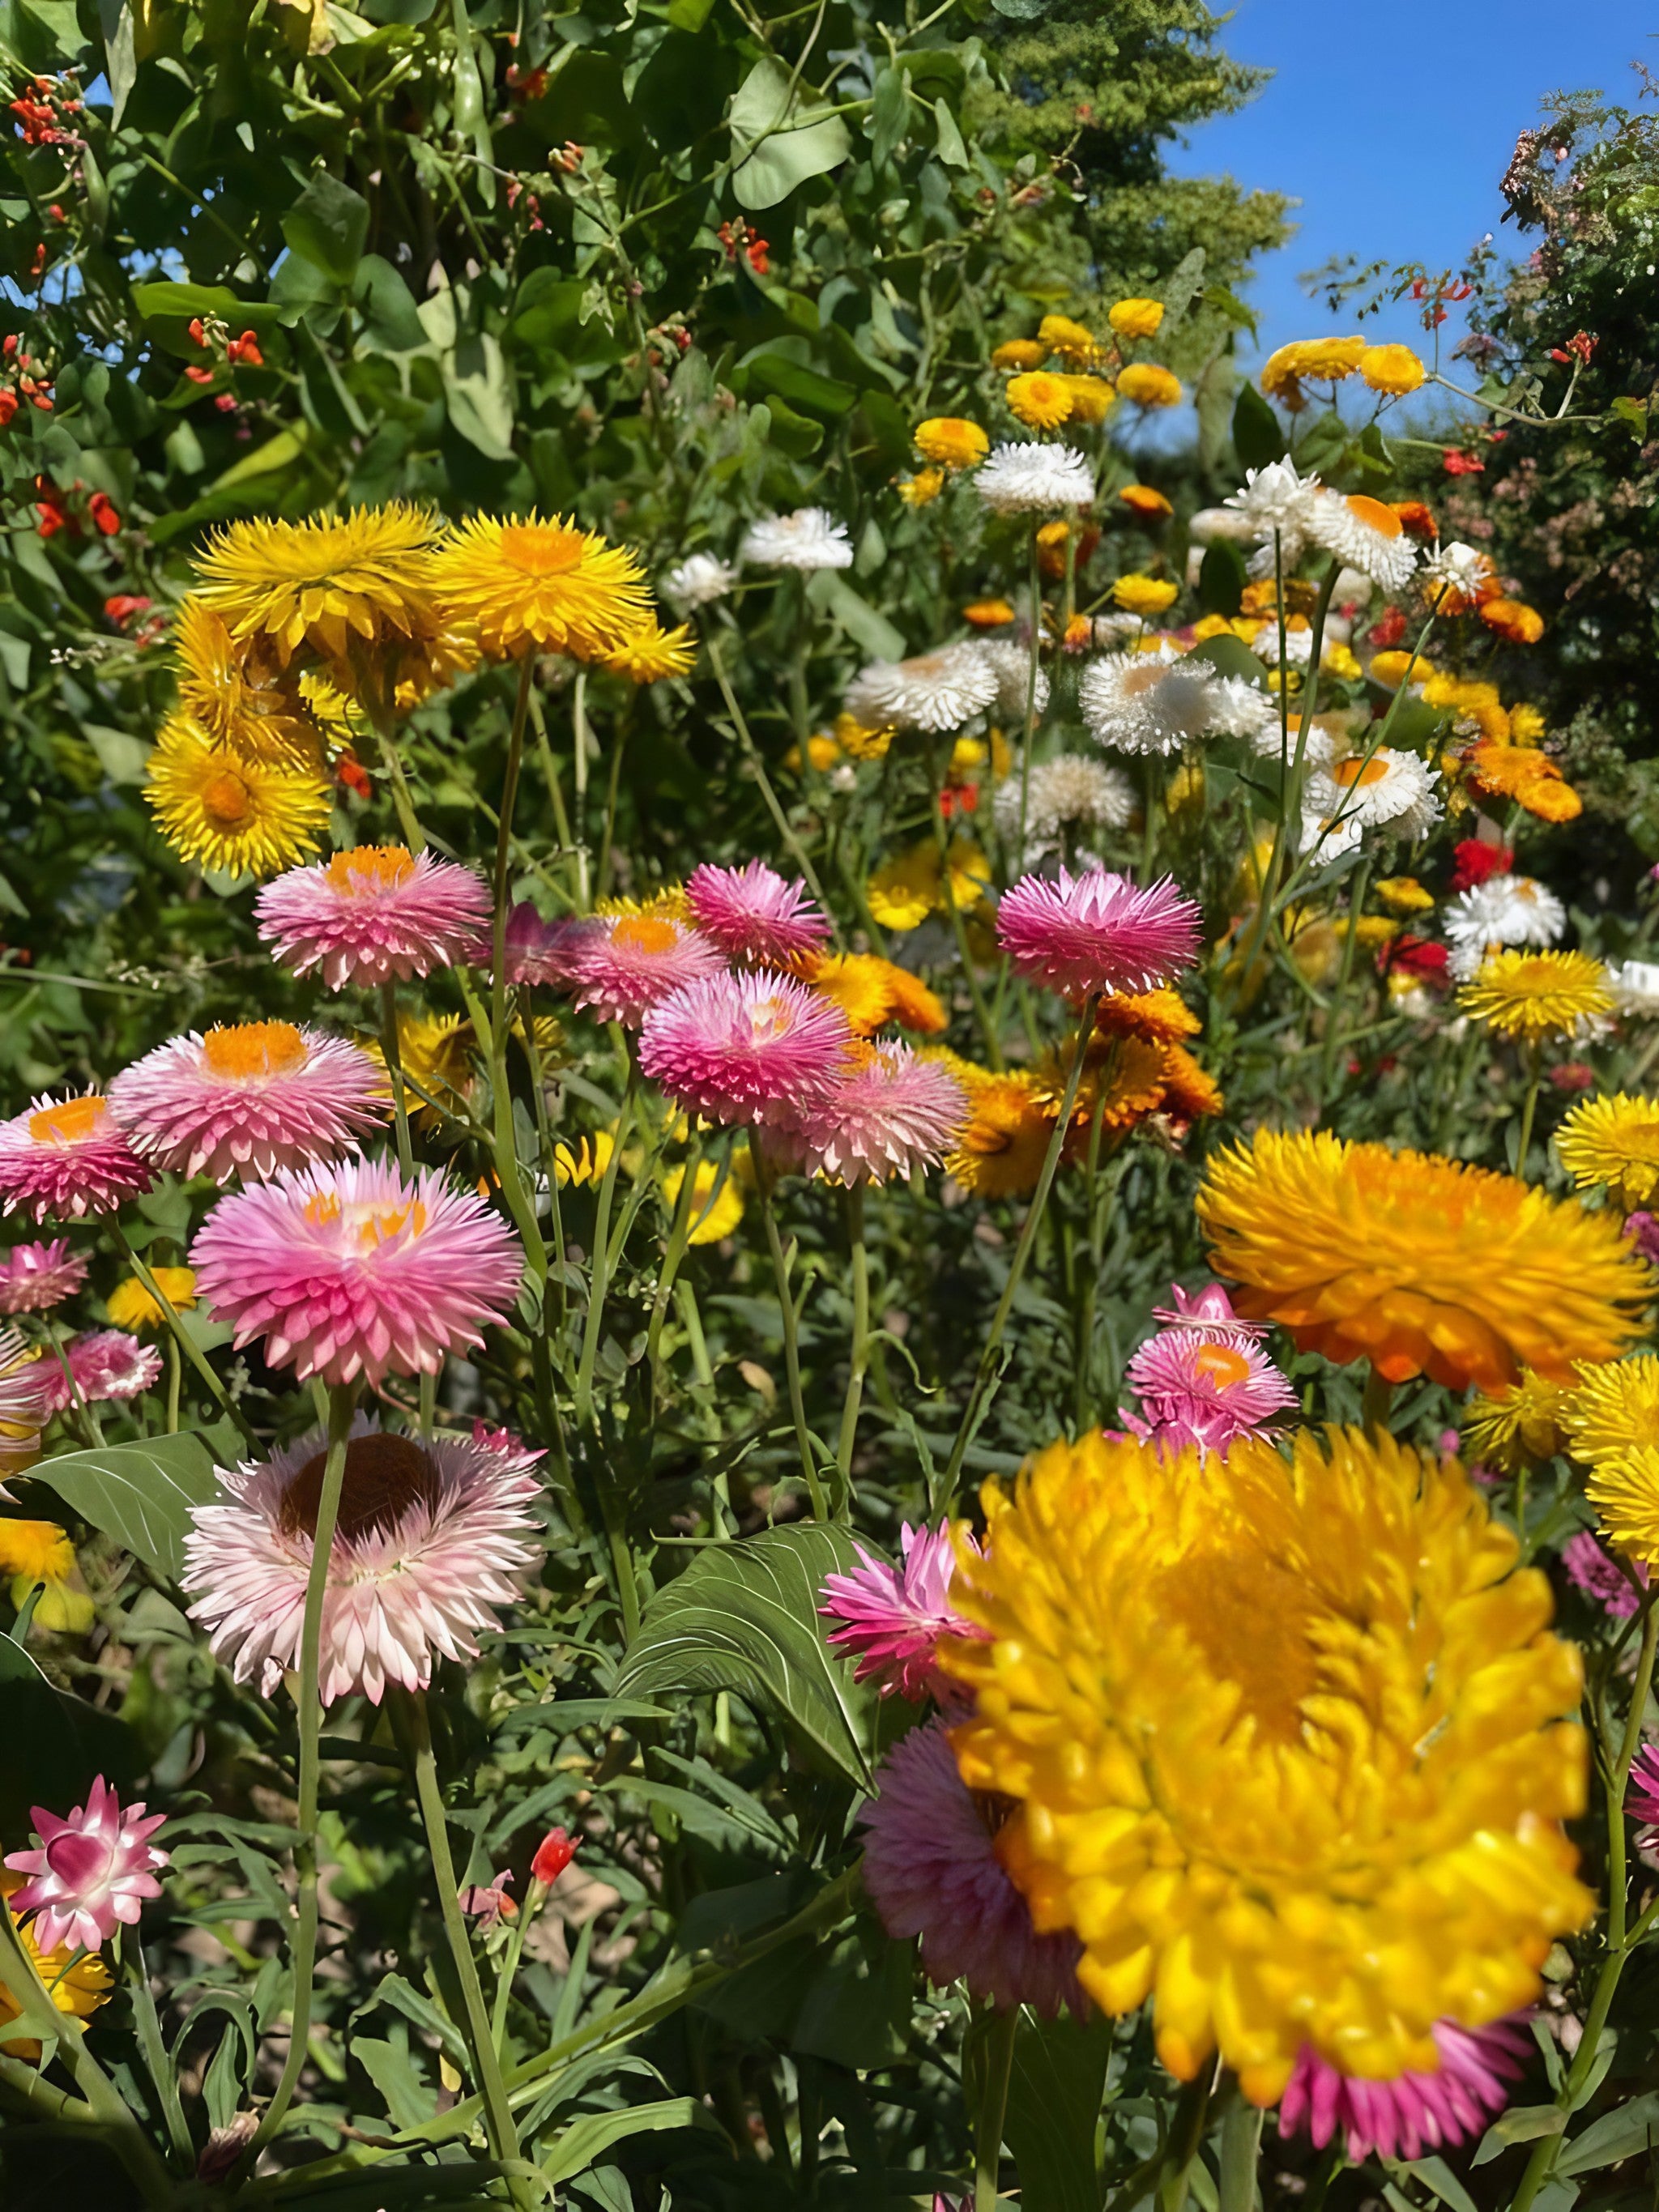 Strawflower Helichrysum Swiss Giant Mix blooming under the sunlight in a floral field